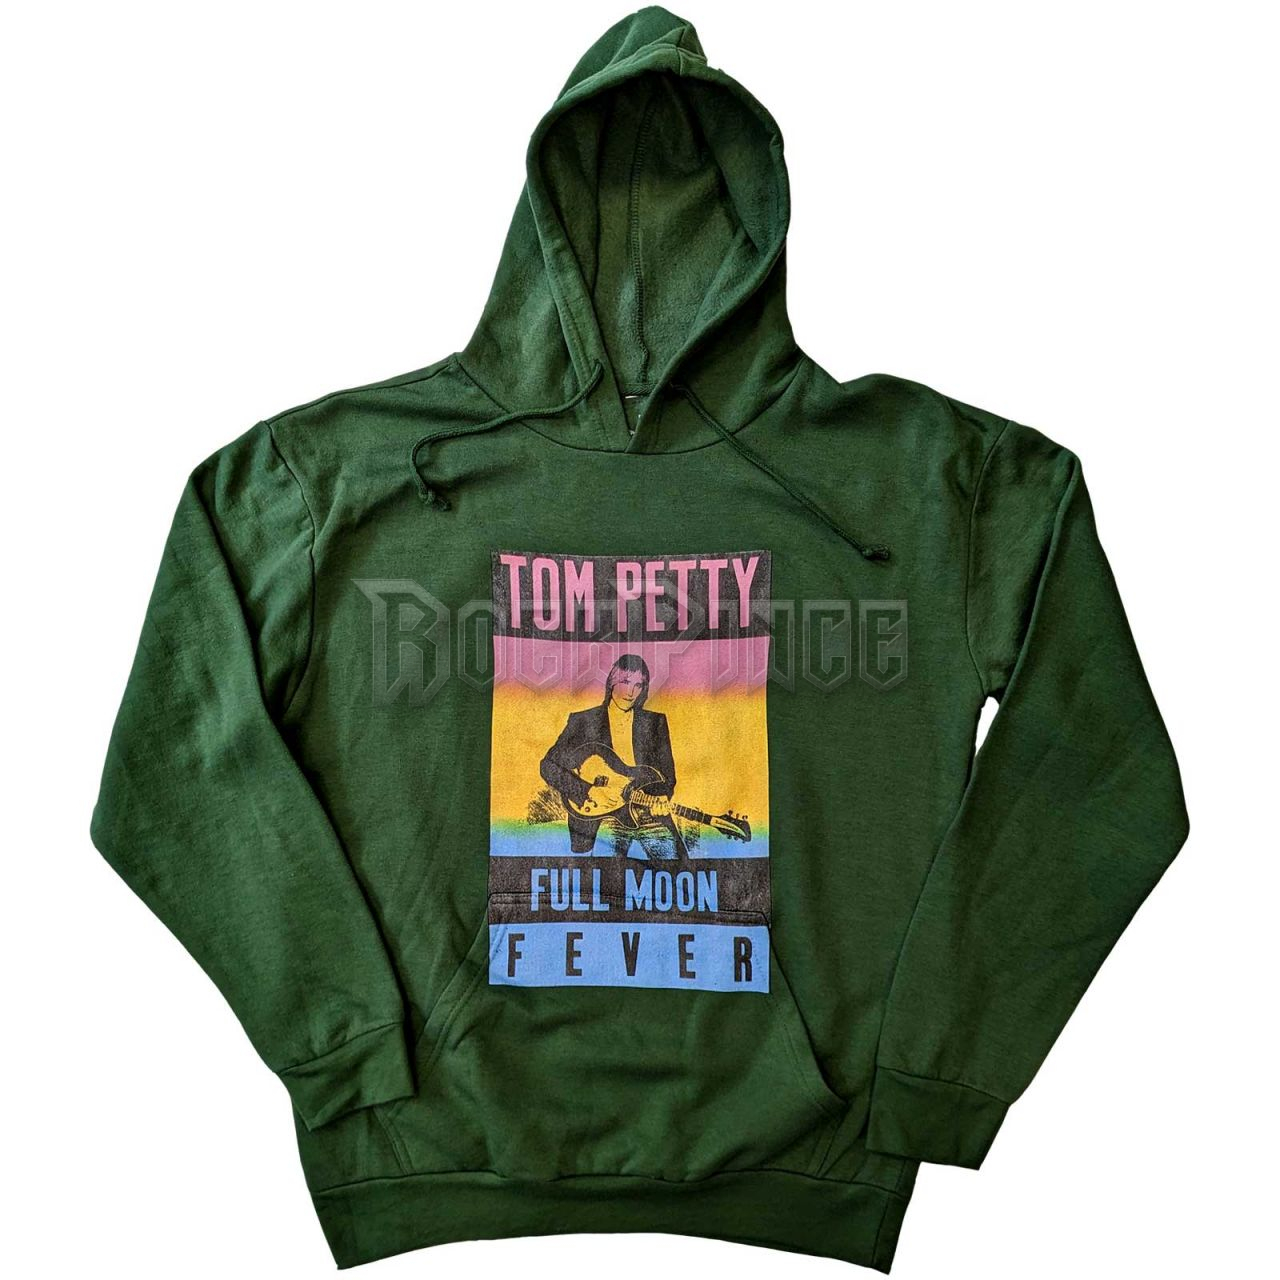 Tom Petty & The Heartbreakers - Full Moon Fever - unisex kapucnis pulóver - PETHD06MGR